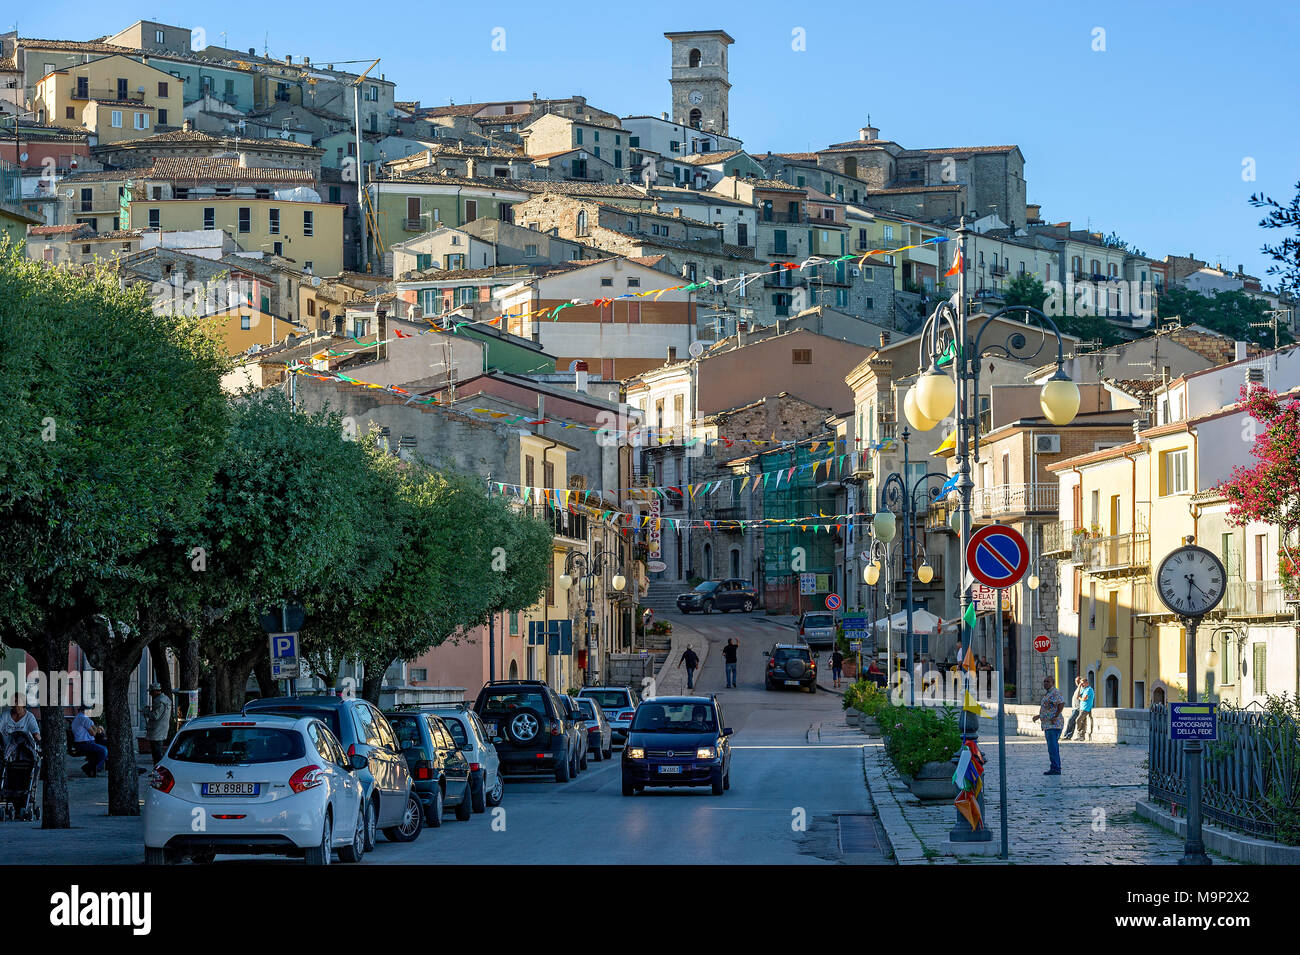 View from Piazza Fontana to the Old Town, Trivento, Molise, Italy Stock Photo